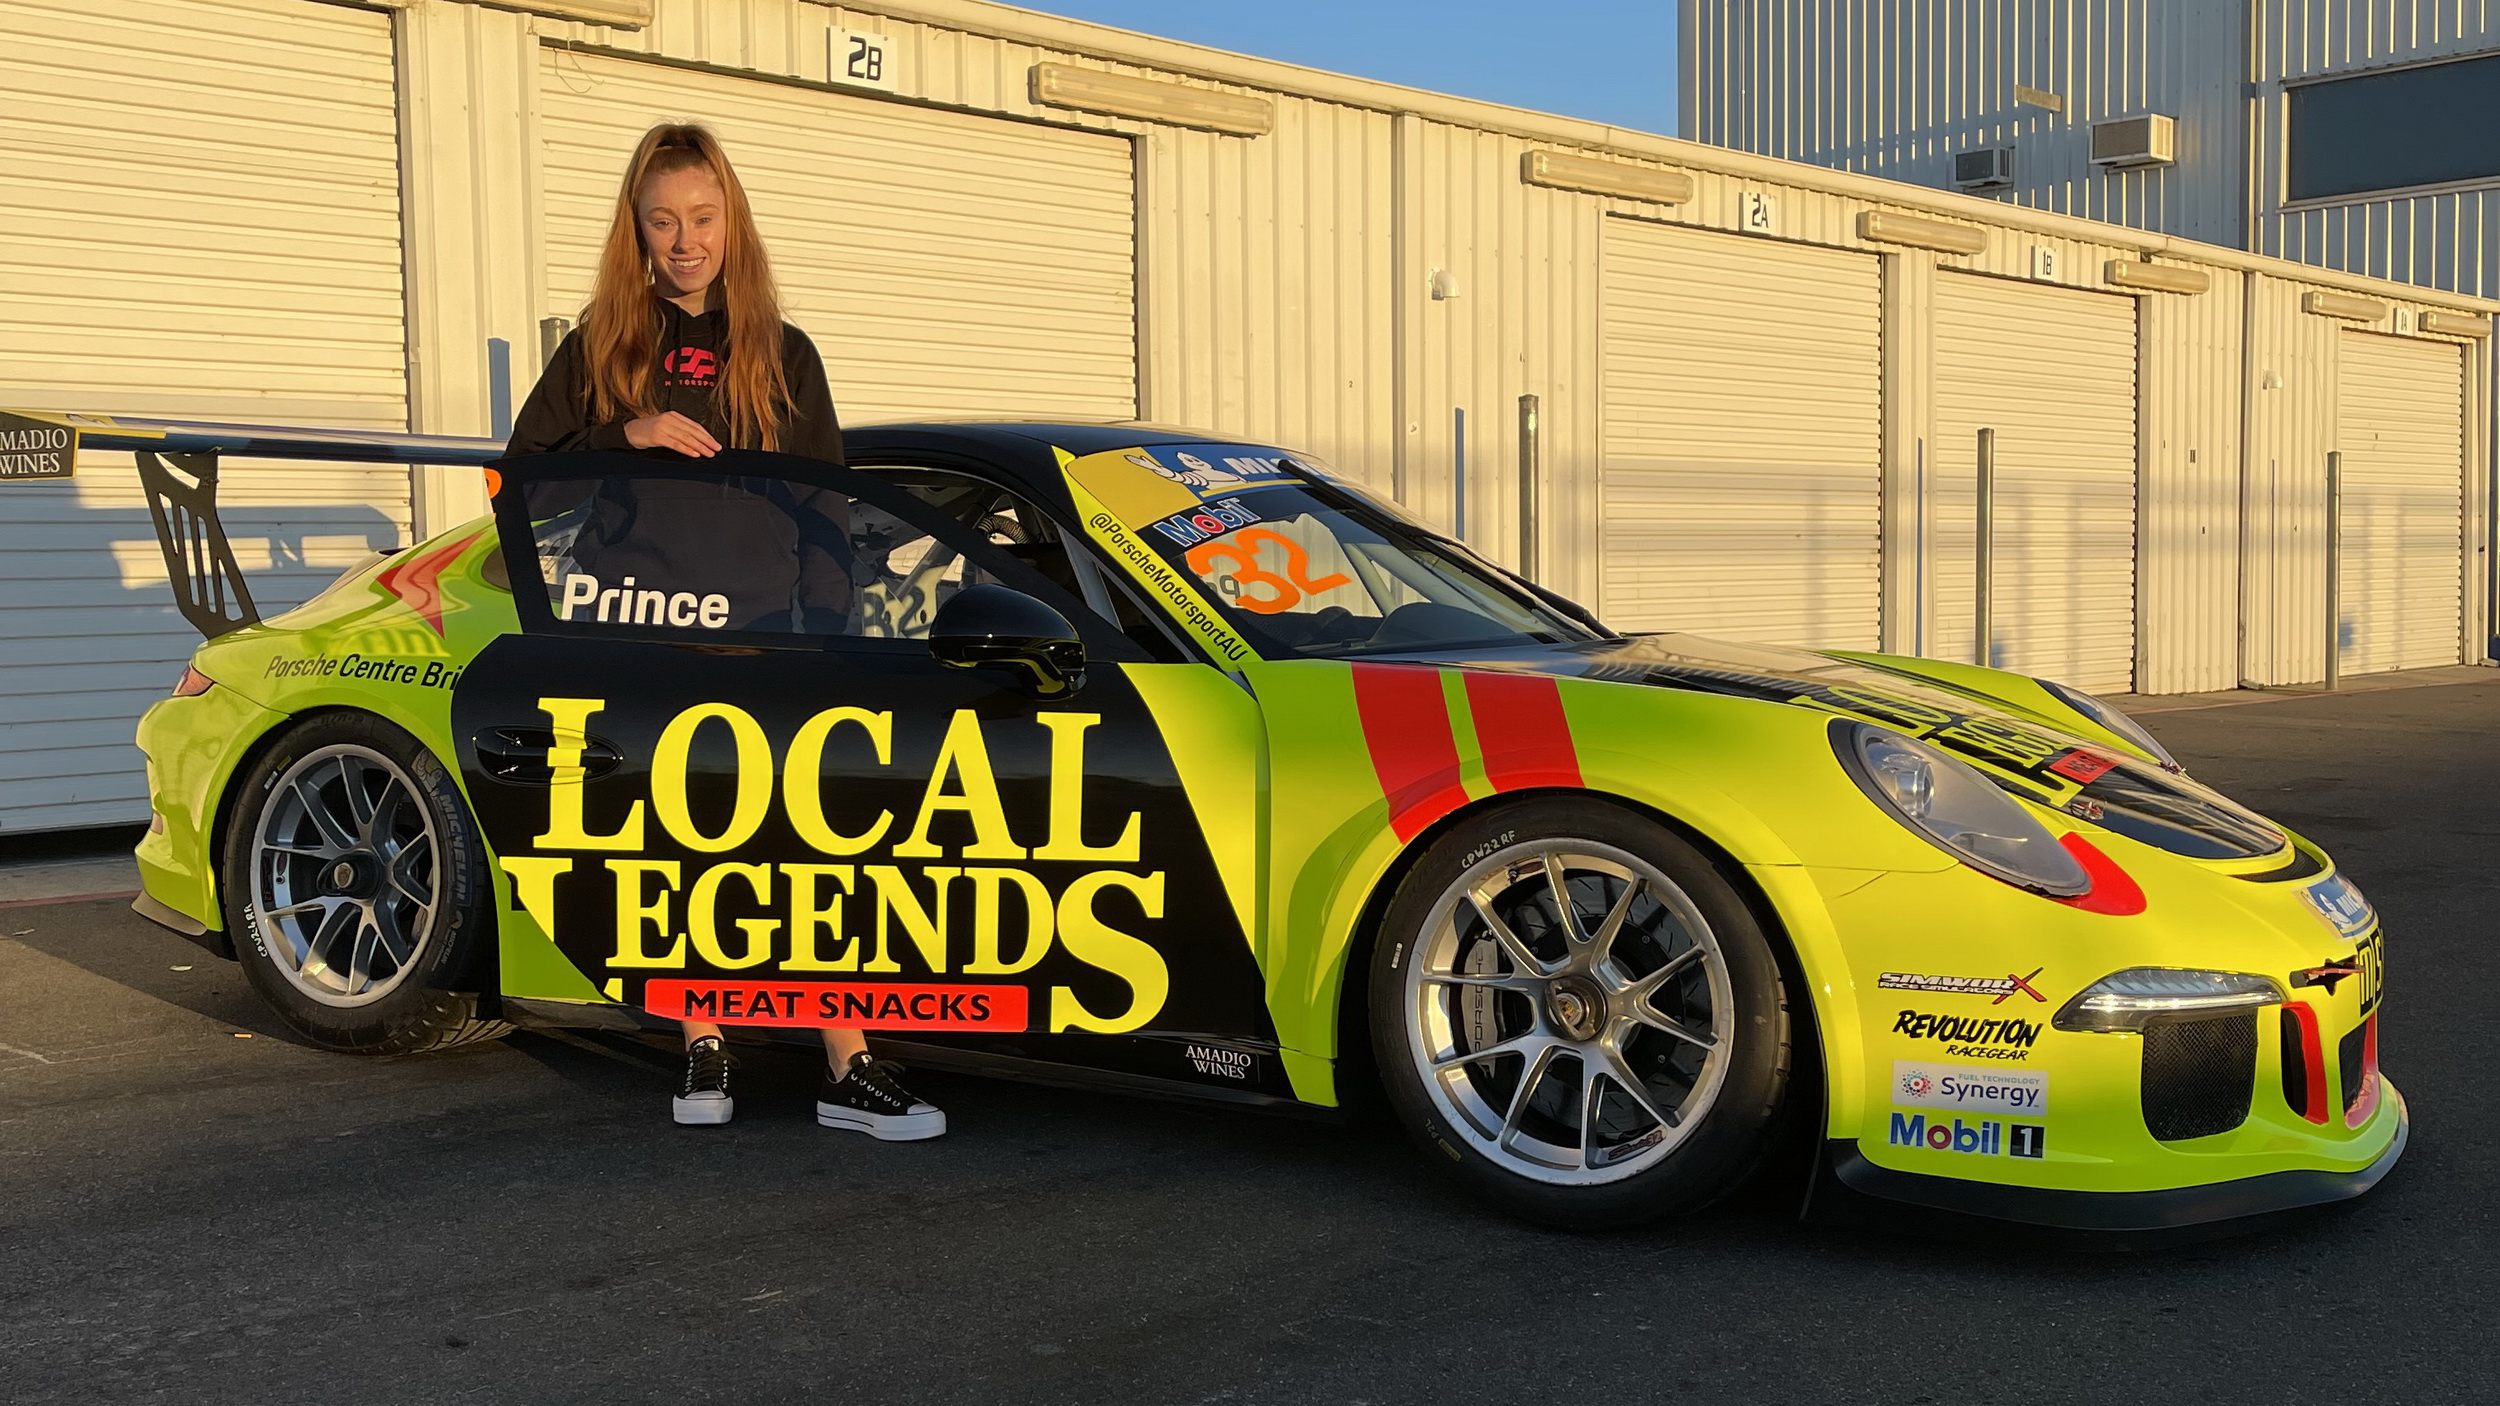 Courtney with her new Local Legends wrapped Porsche GT3.